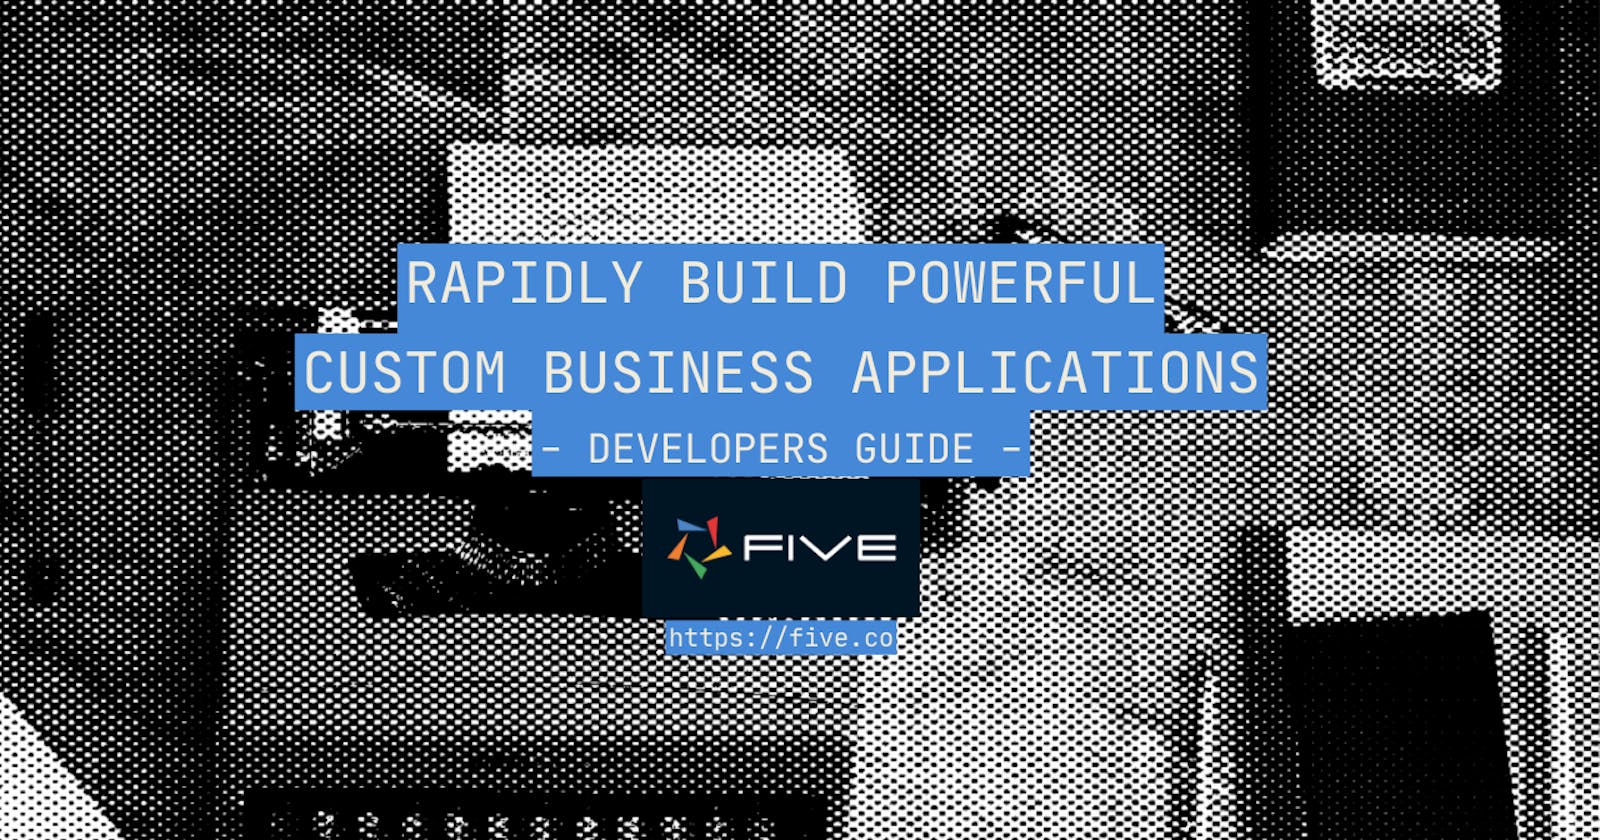 Rapidly Build Powerful Custom Business Applications: A Developer's Guide